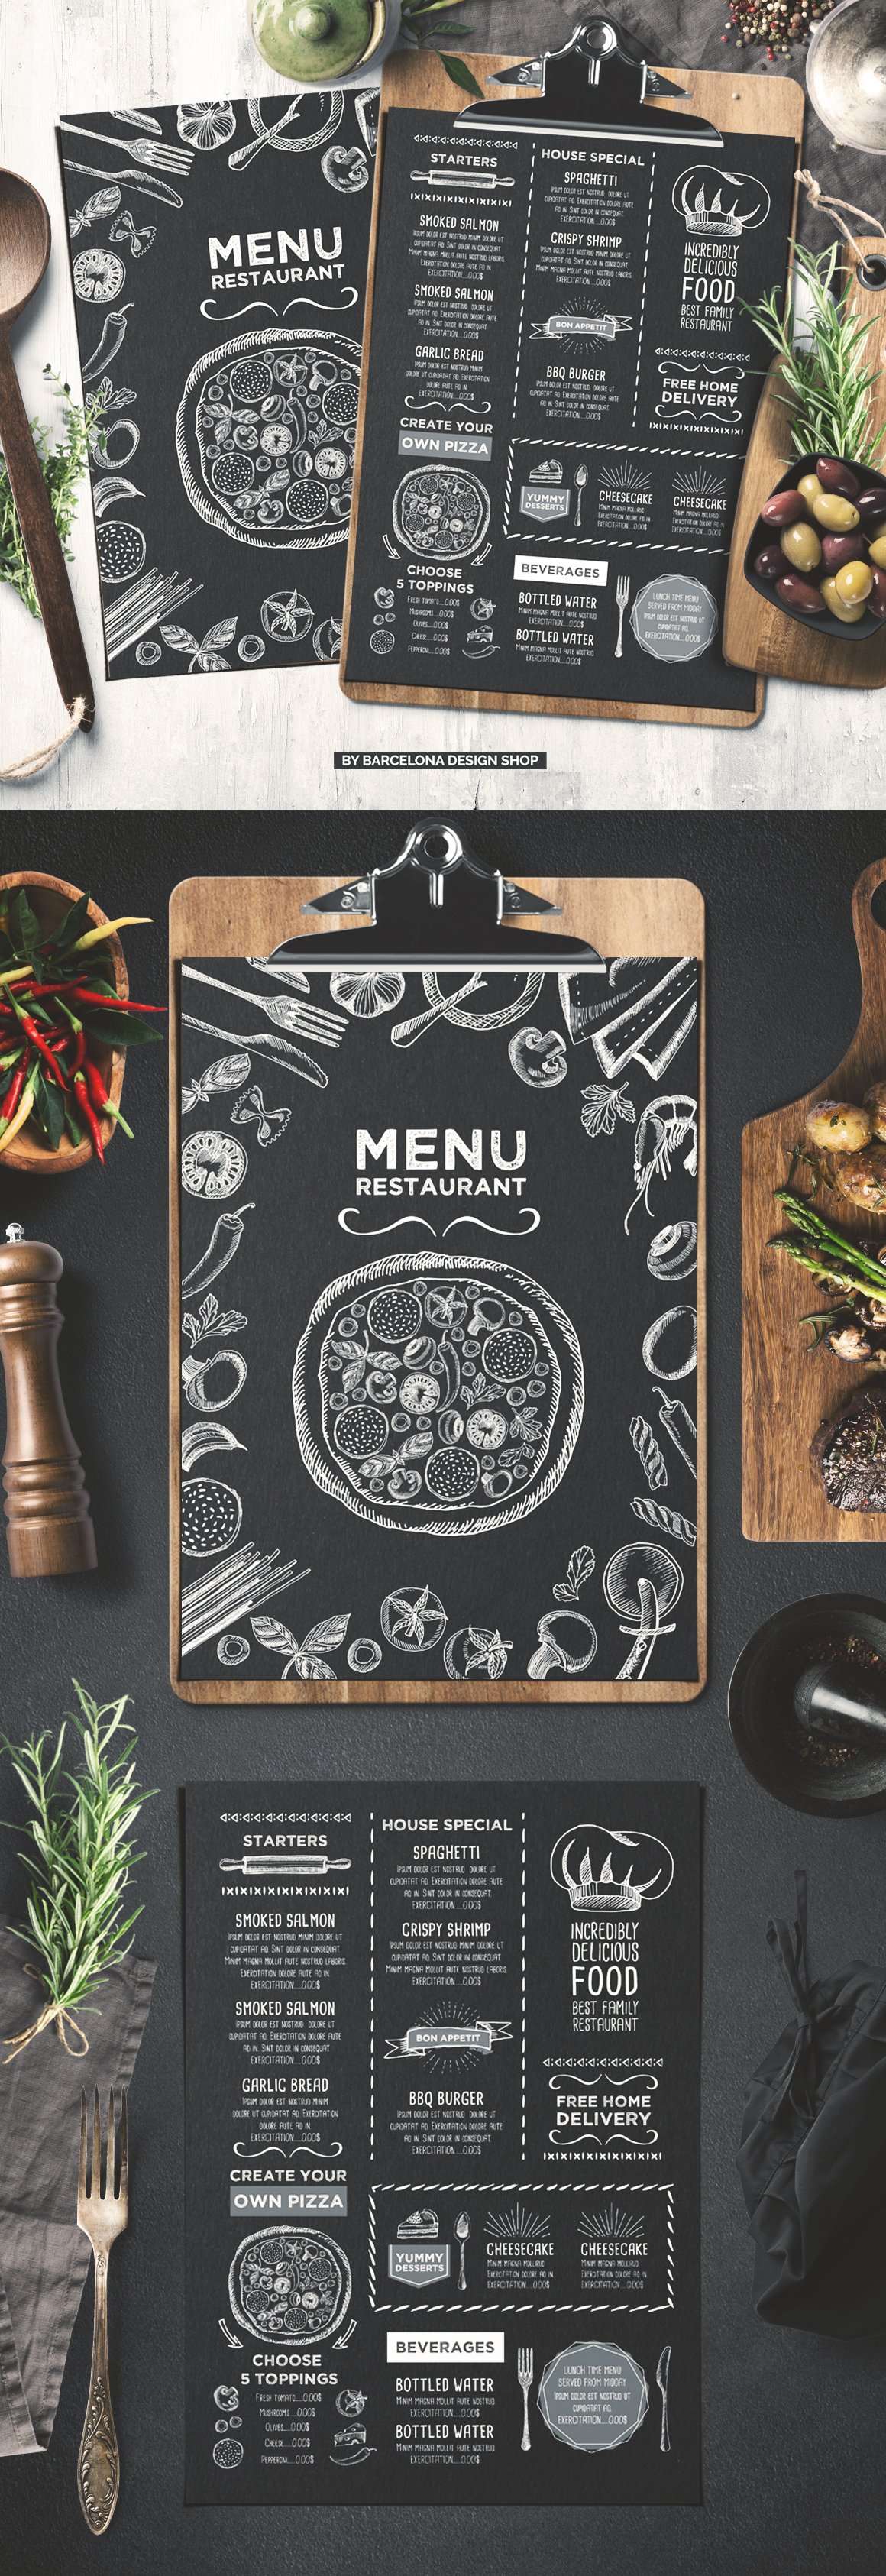 FREE! Trifold + Cafe Menu Template cover image.